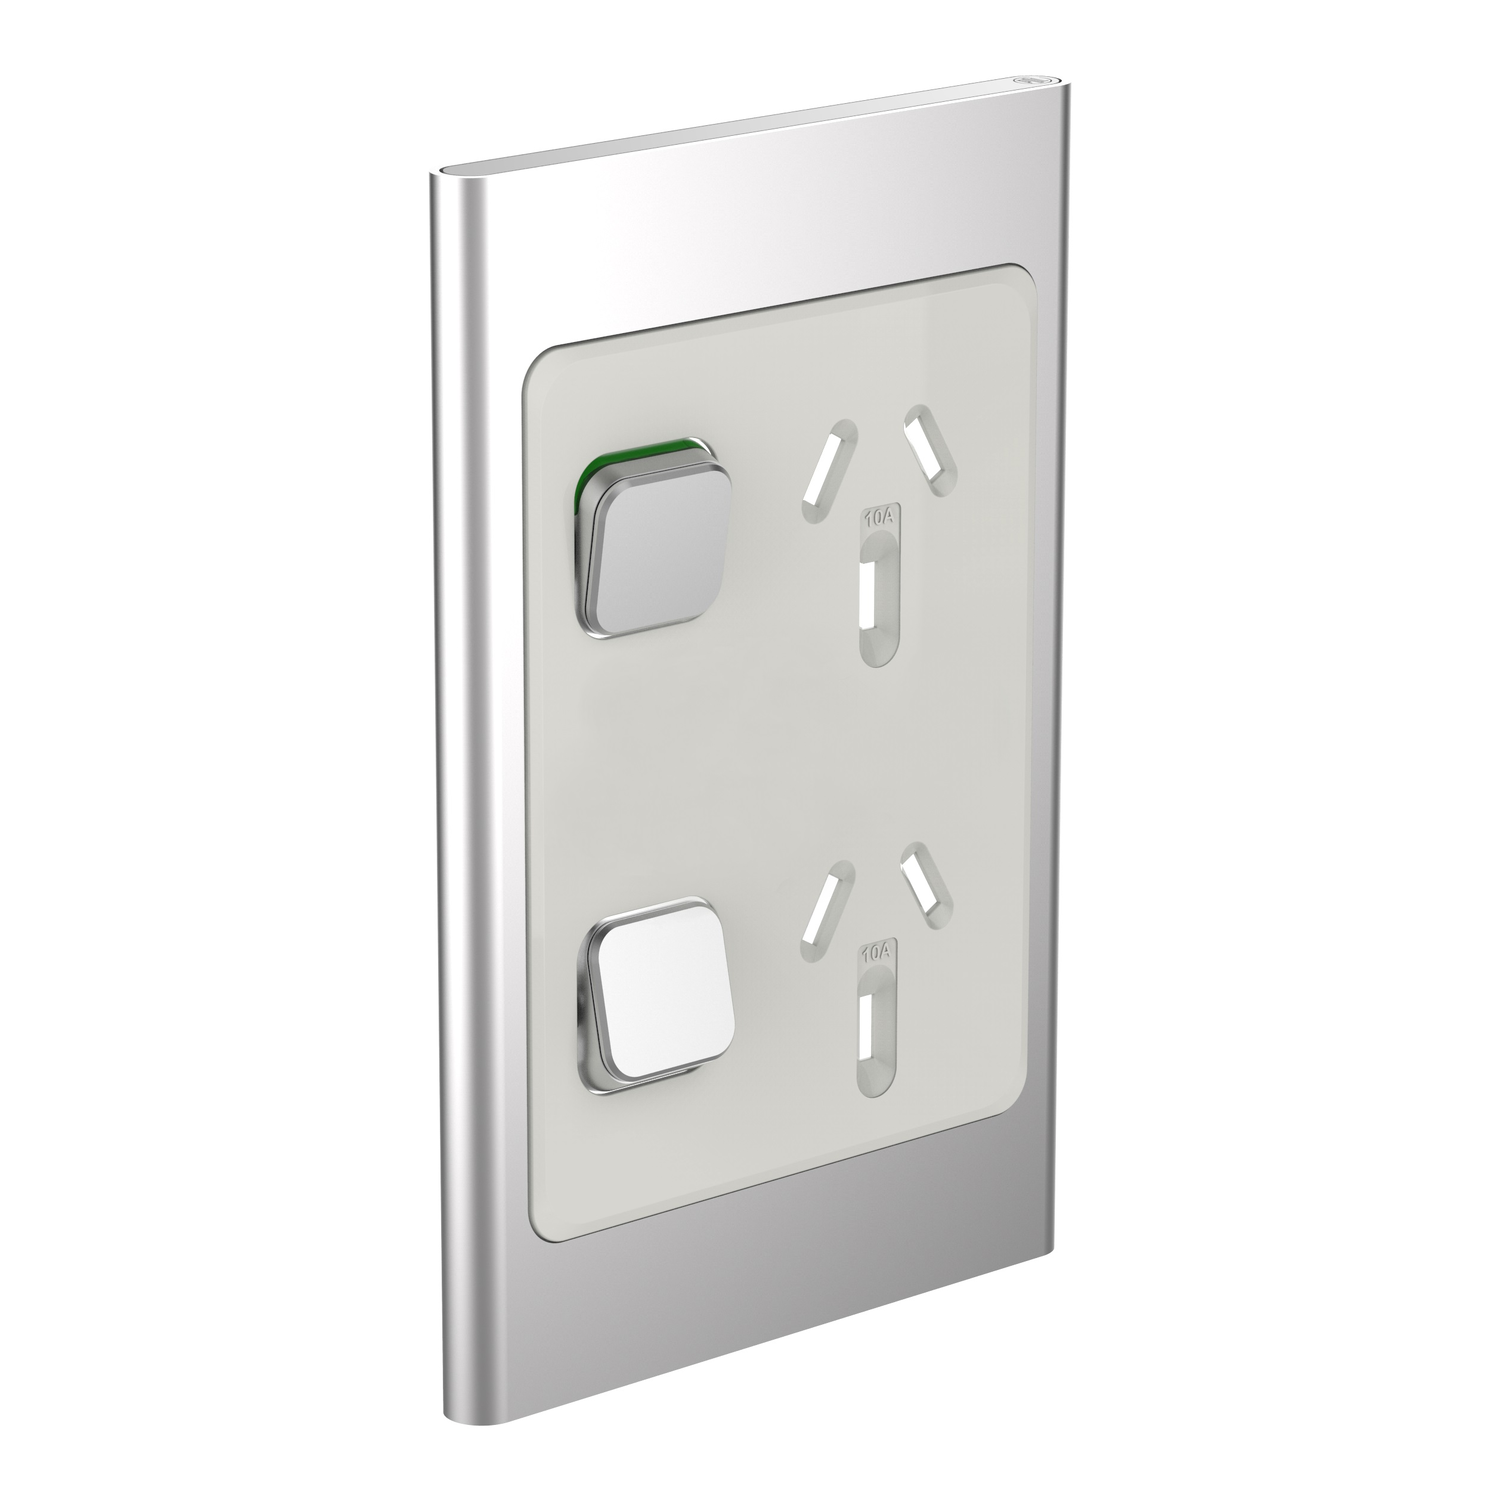 PDL Iconic Styl - Cover Plate Double Switched Socket Vertical - Silver